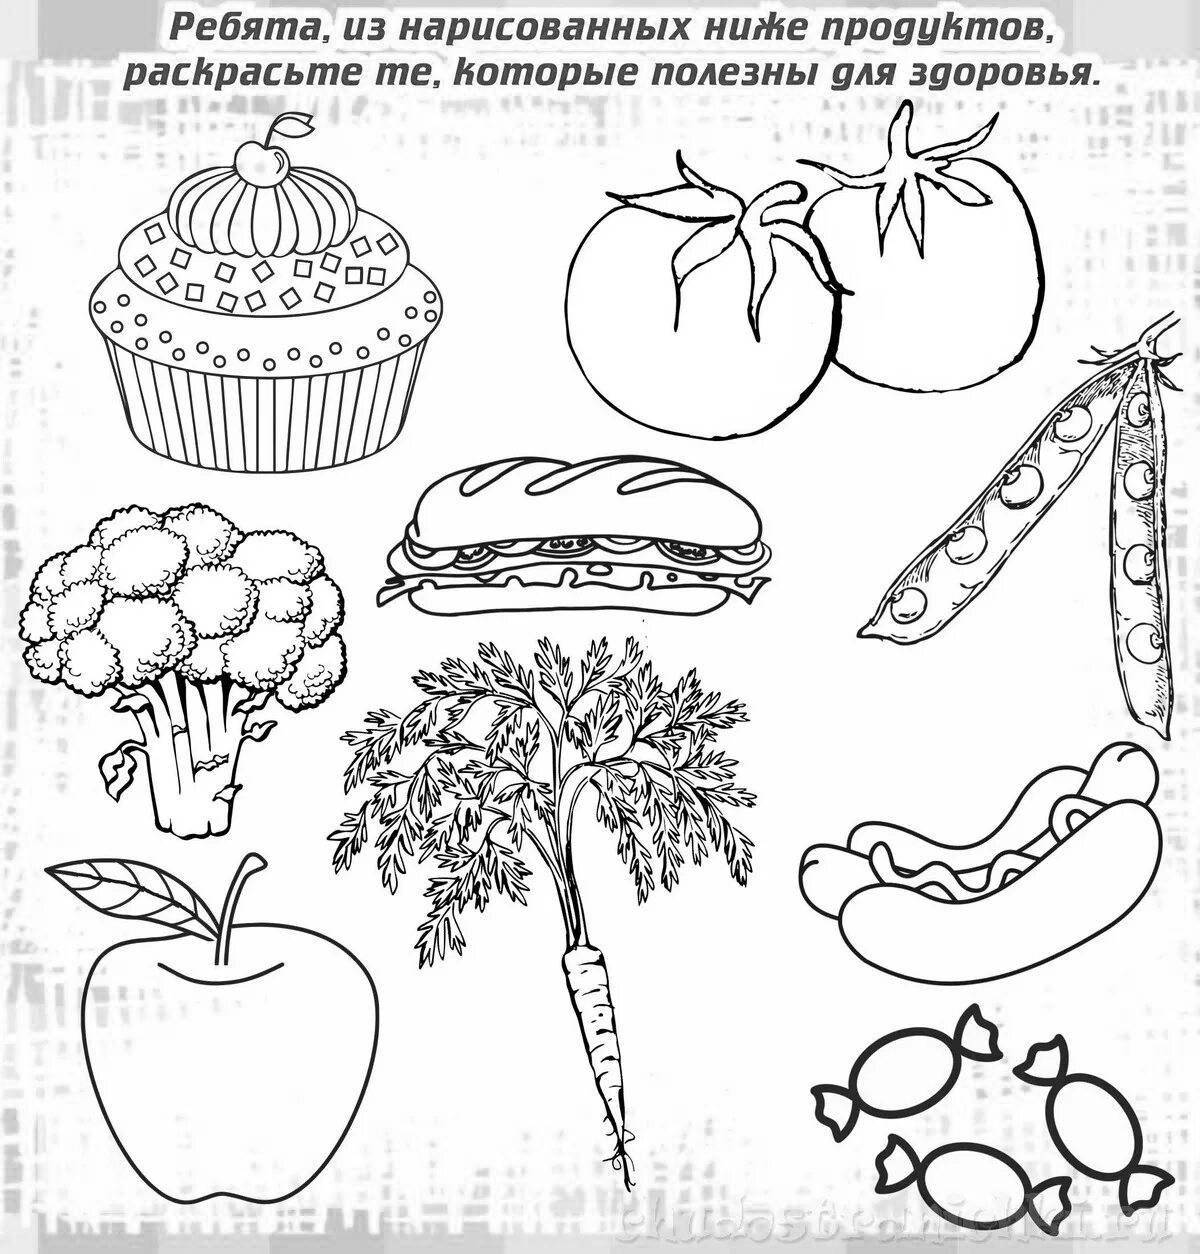 Colorful junk food coloring page